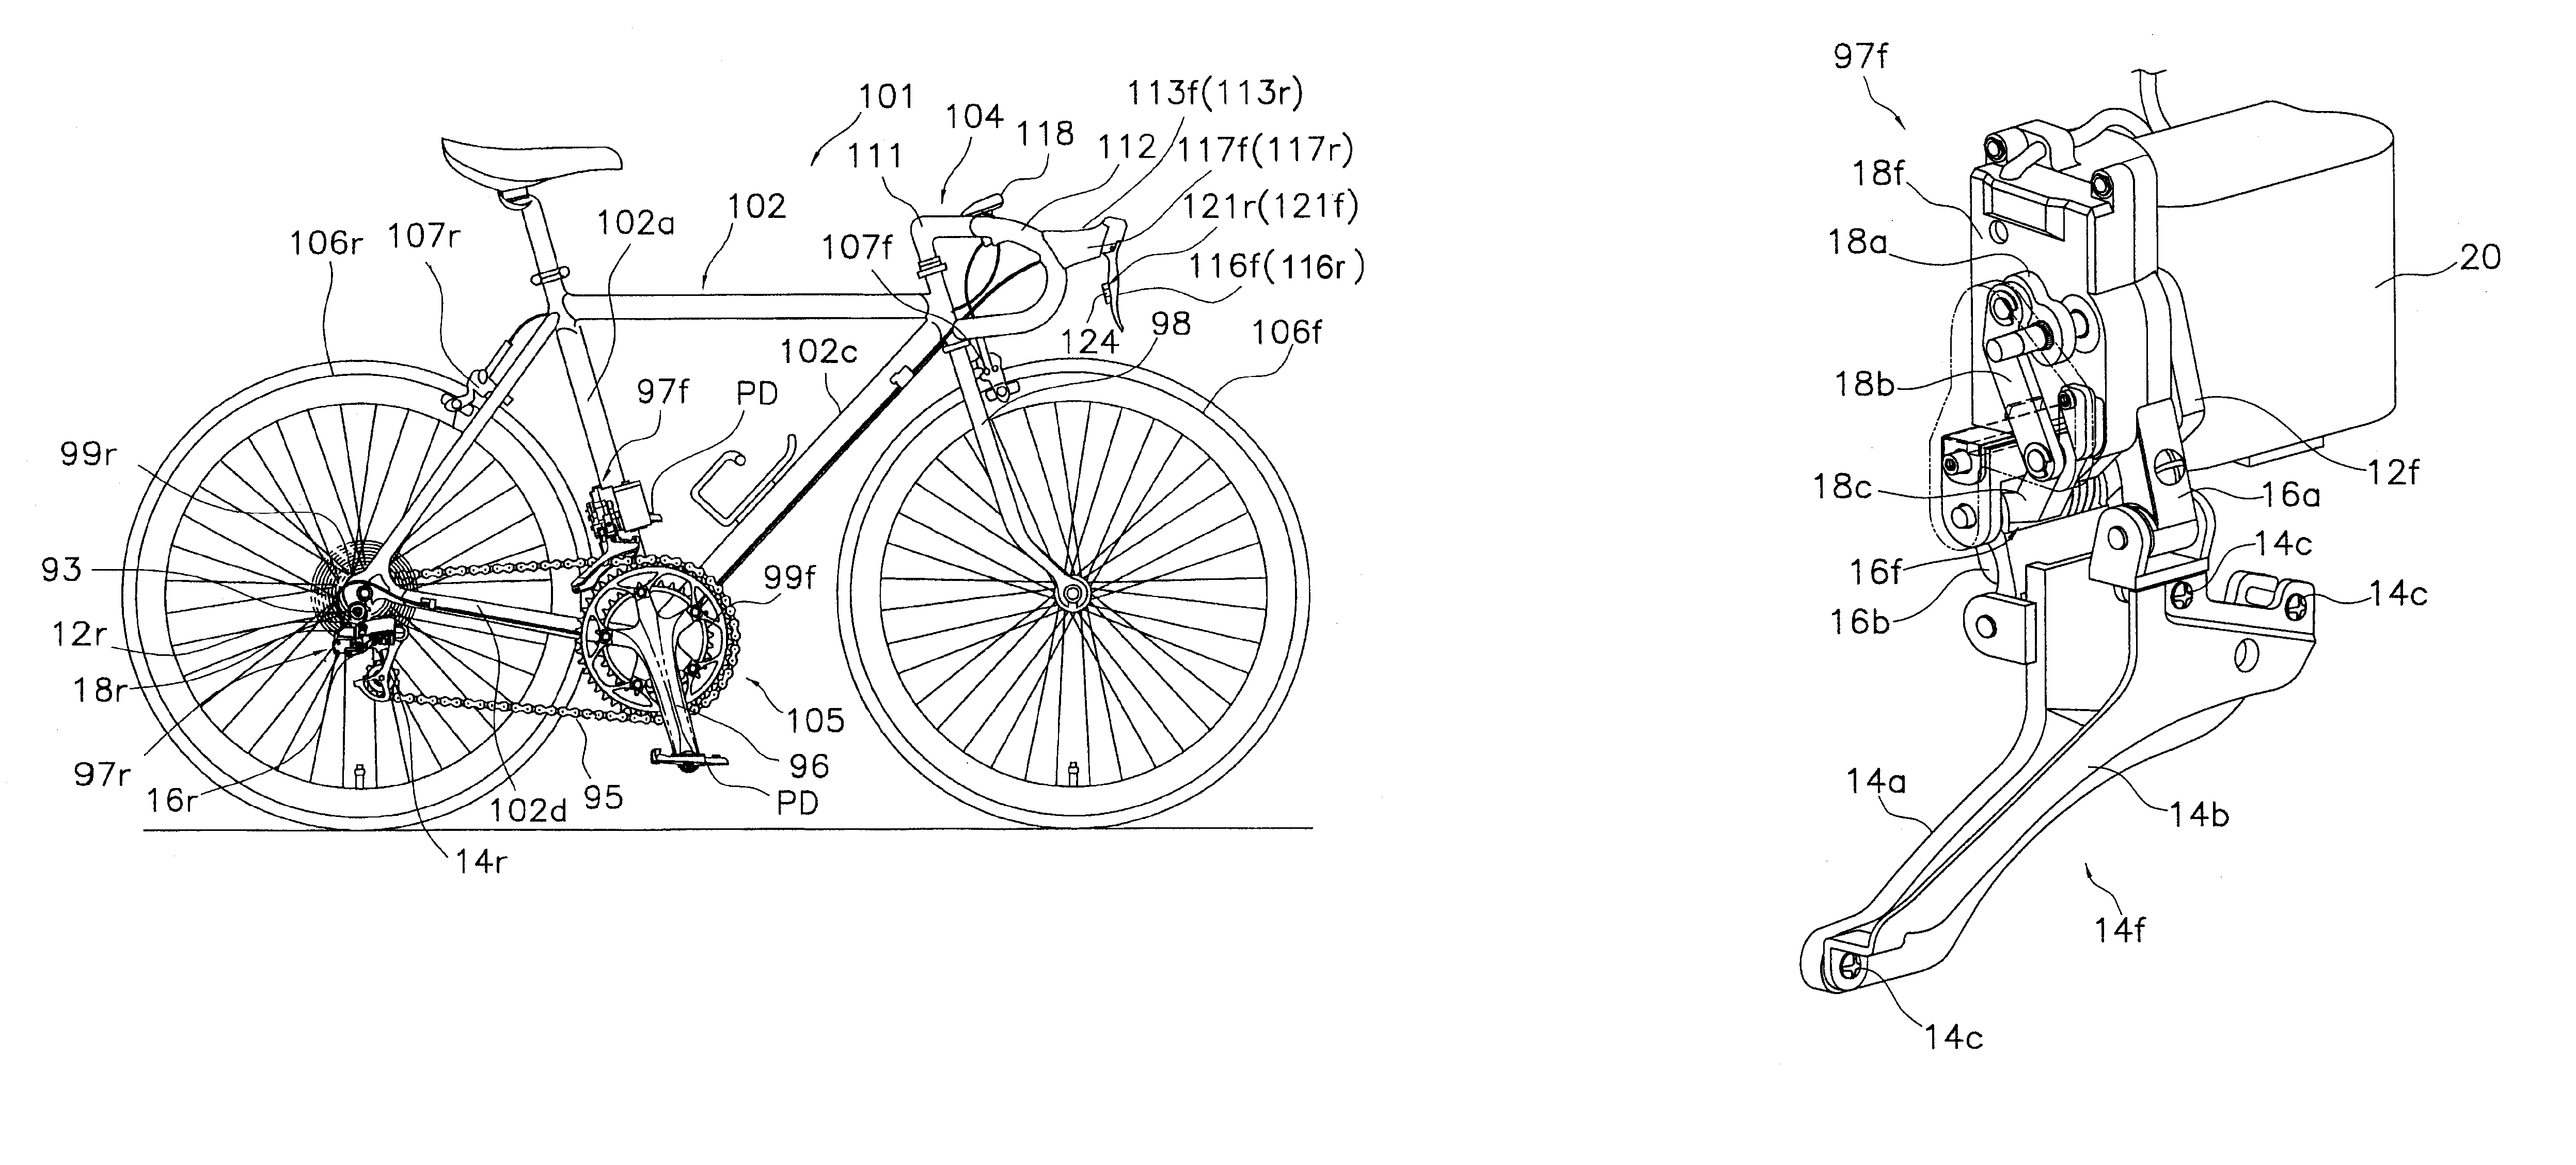 Bicycle derailleur apparatus with a supported power supply